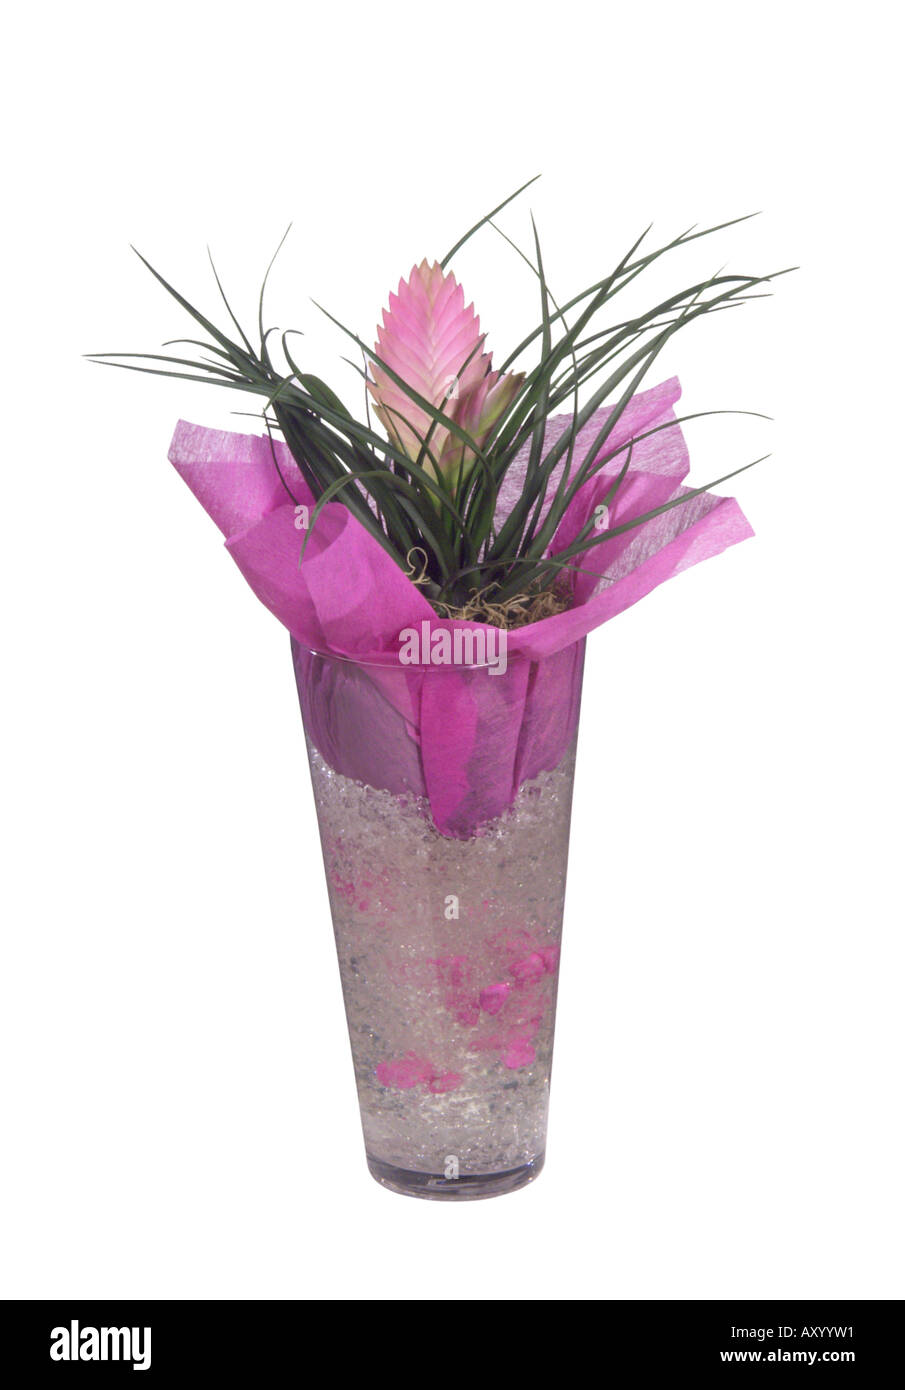 Pink Quill (Tillandsia cyanea), potted plants Stock Photo